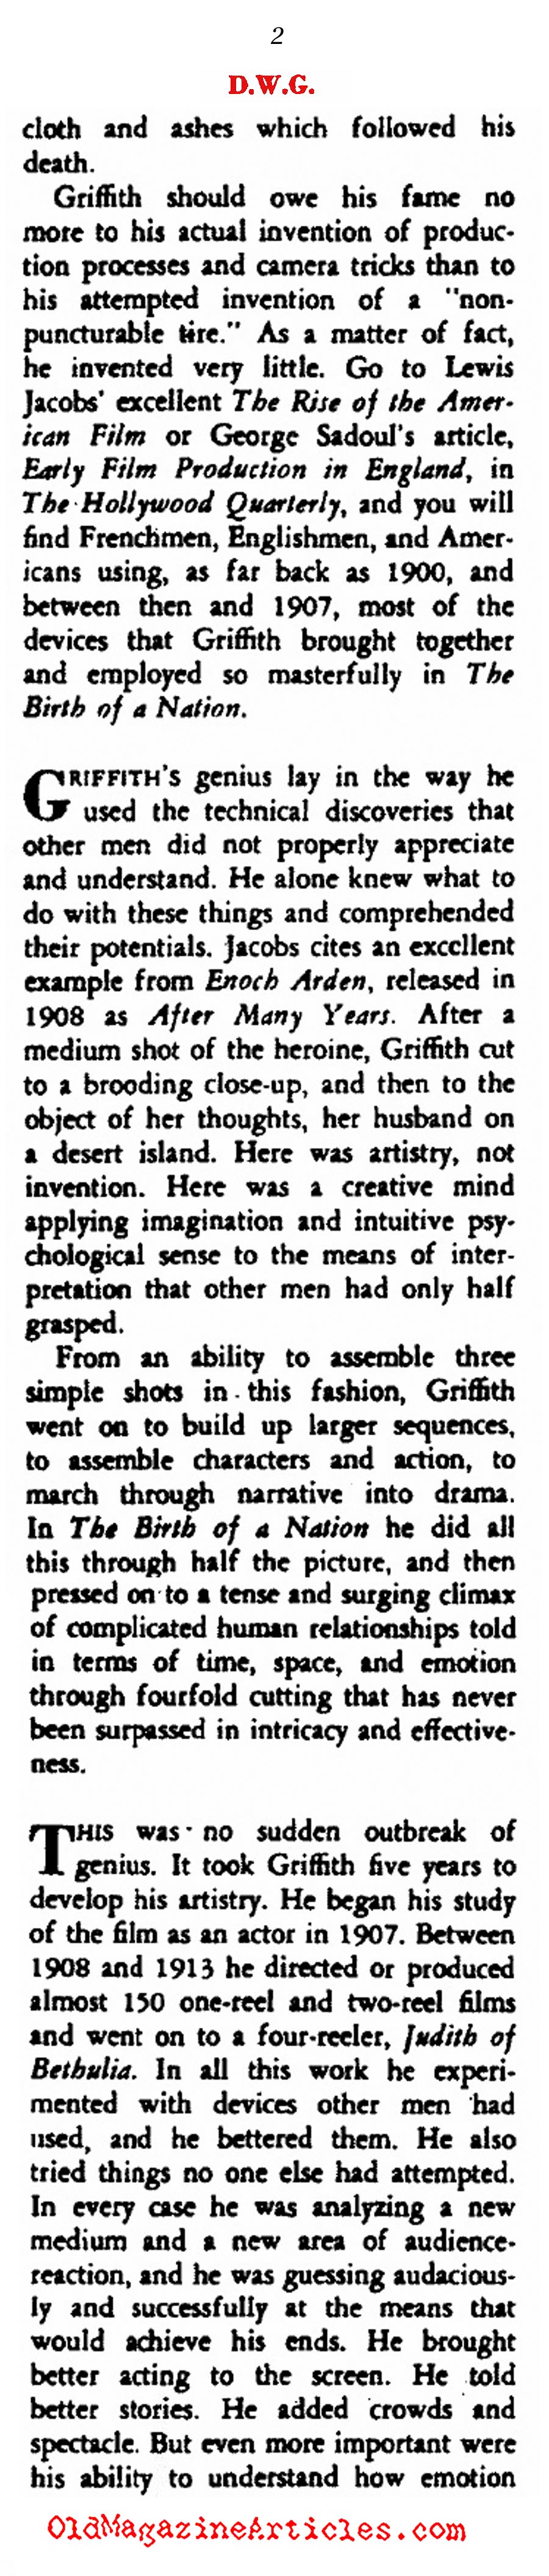 Back-Handed Compliments for D.W. Griffith (Rob Wagner's Script Magazine, 1948)